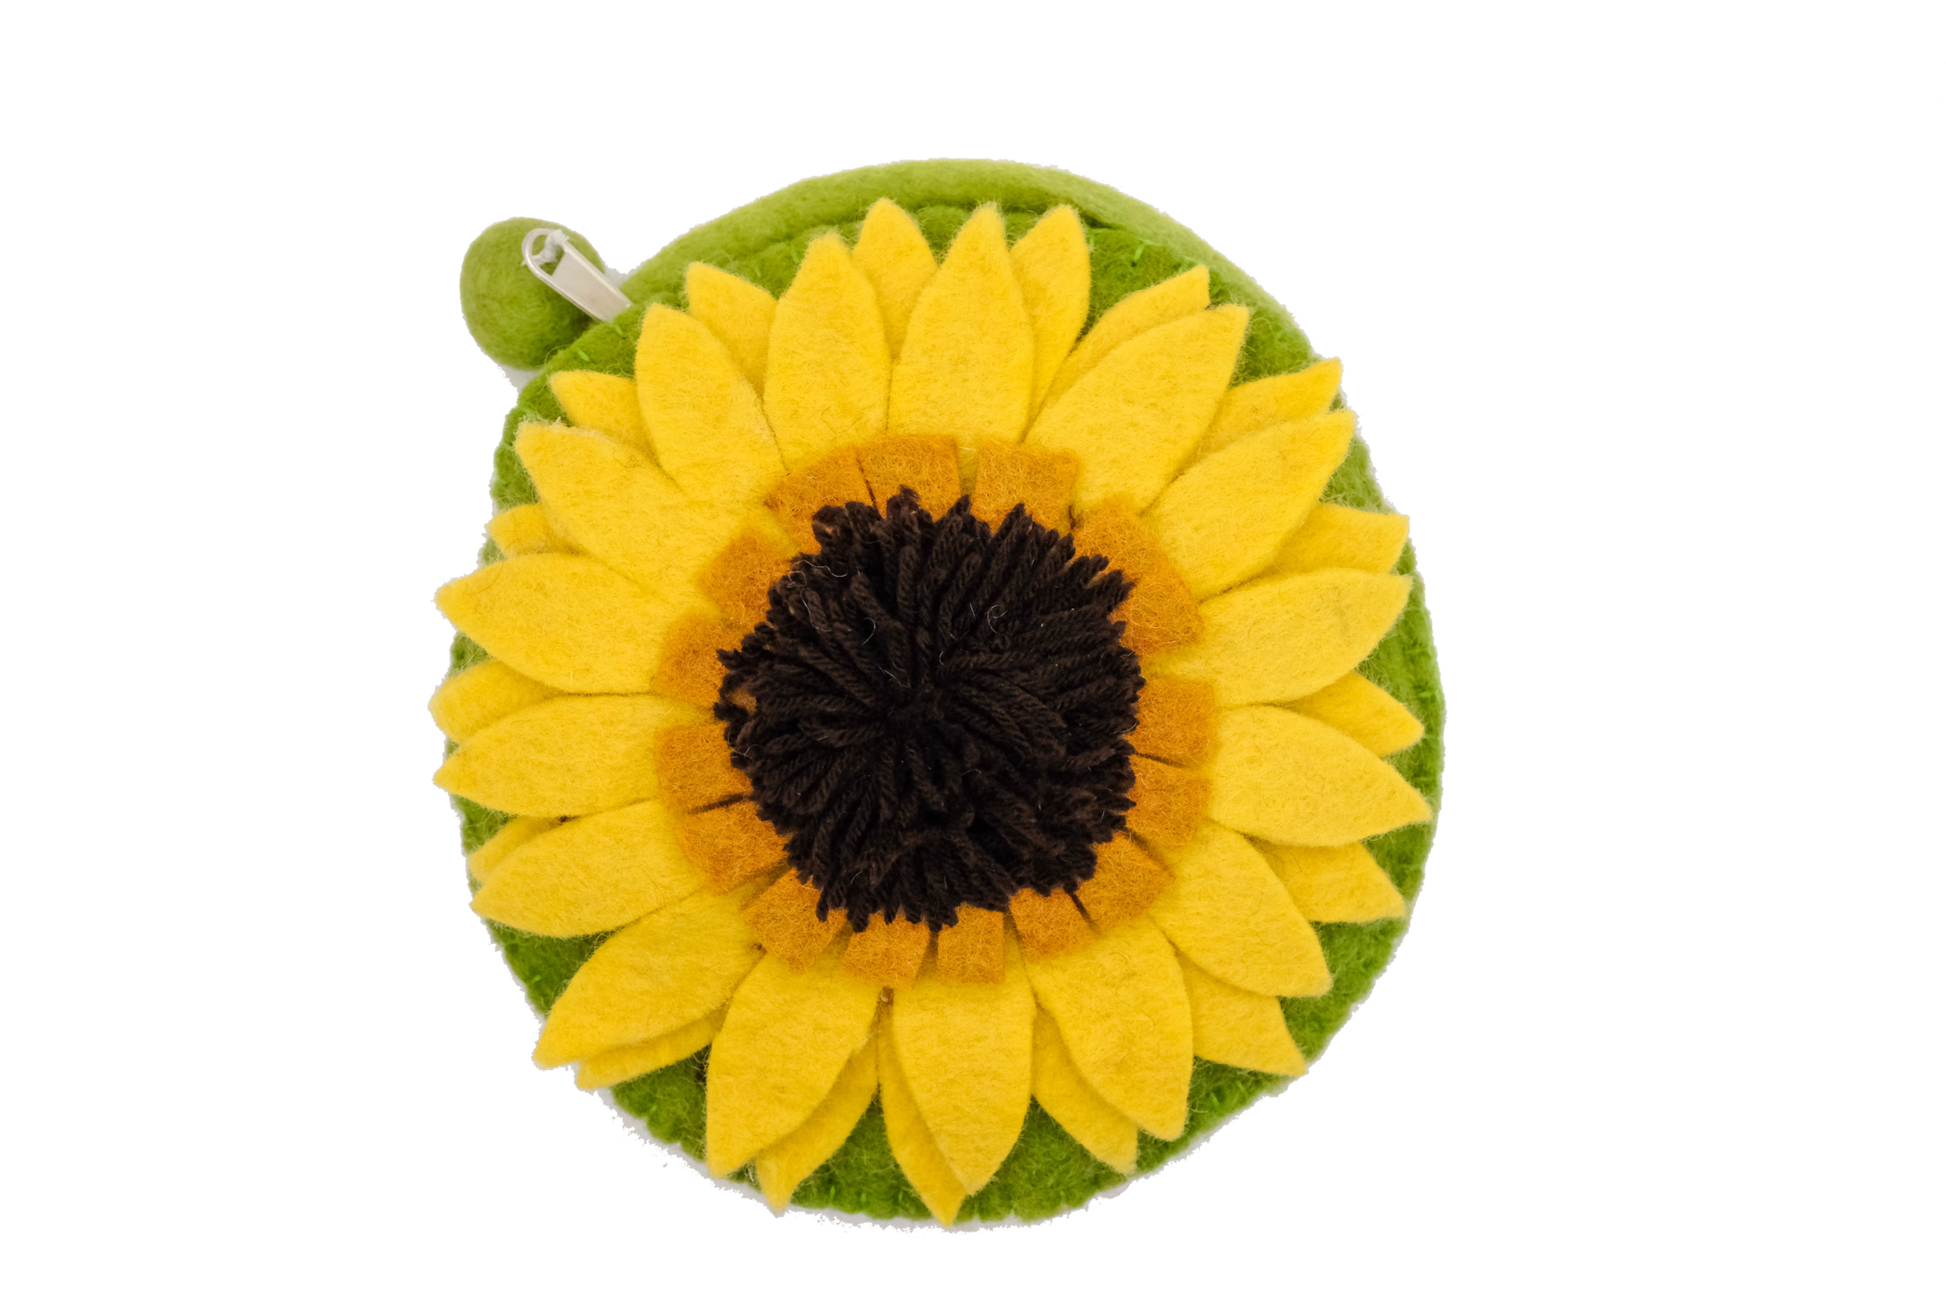 This Global Groove Life, handmade, ethical, fair trade, eco-friendly, sustainable, green  and yellow felt shoulder bag was created by artisans in Kathmandu Nepal and is adorned with an adorable sunflower motif.